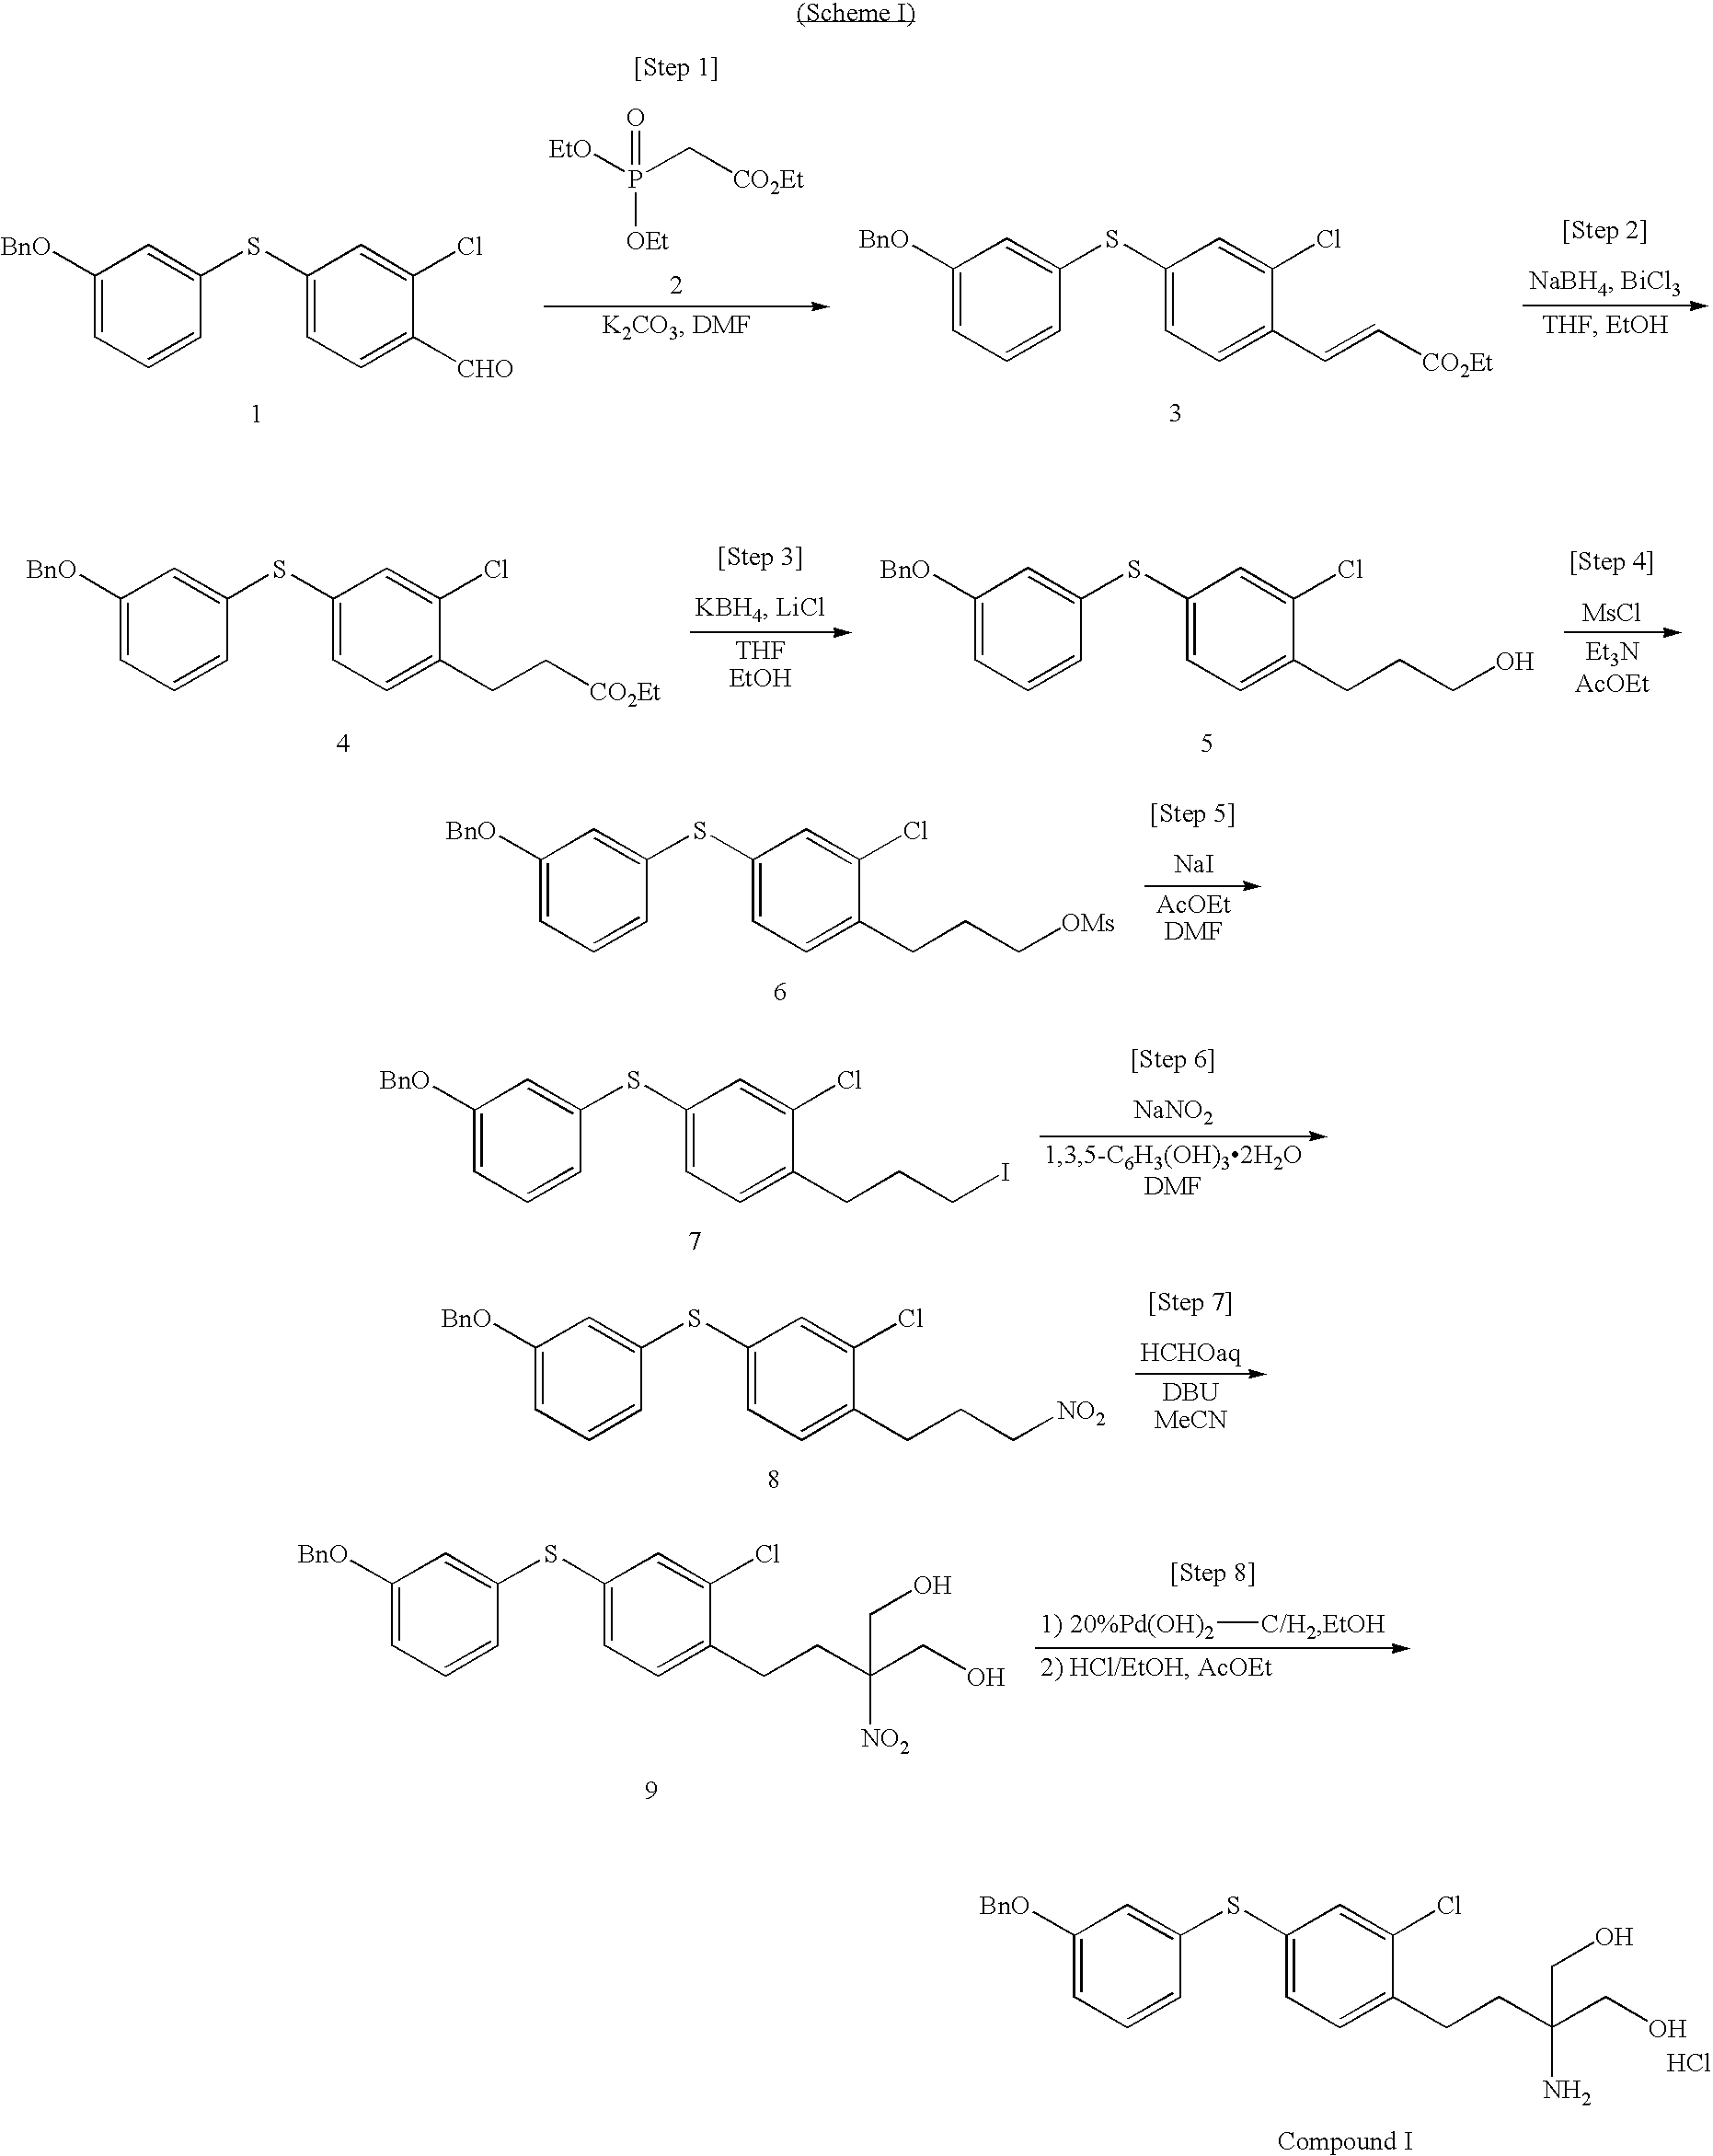 Process for Producing 2-Amino-2-[2-[4-(3-Benzyloxyphenylthio)-2-Chlorophenyl]Ethyl]-1,3-Propanediol Hydrochloride and Hydrates Thereof, and Intermediates in the Production Thereof